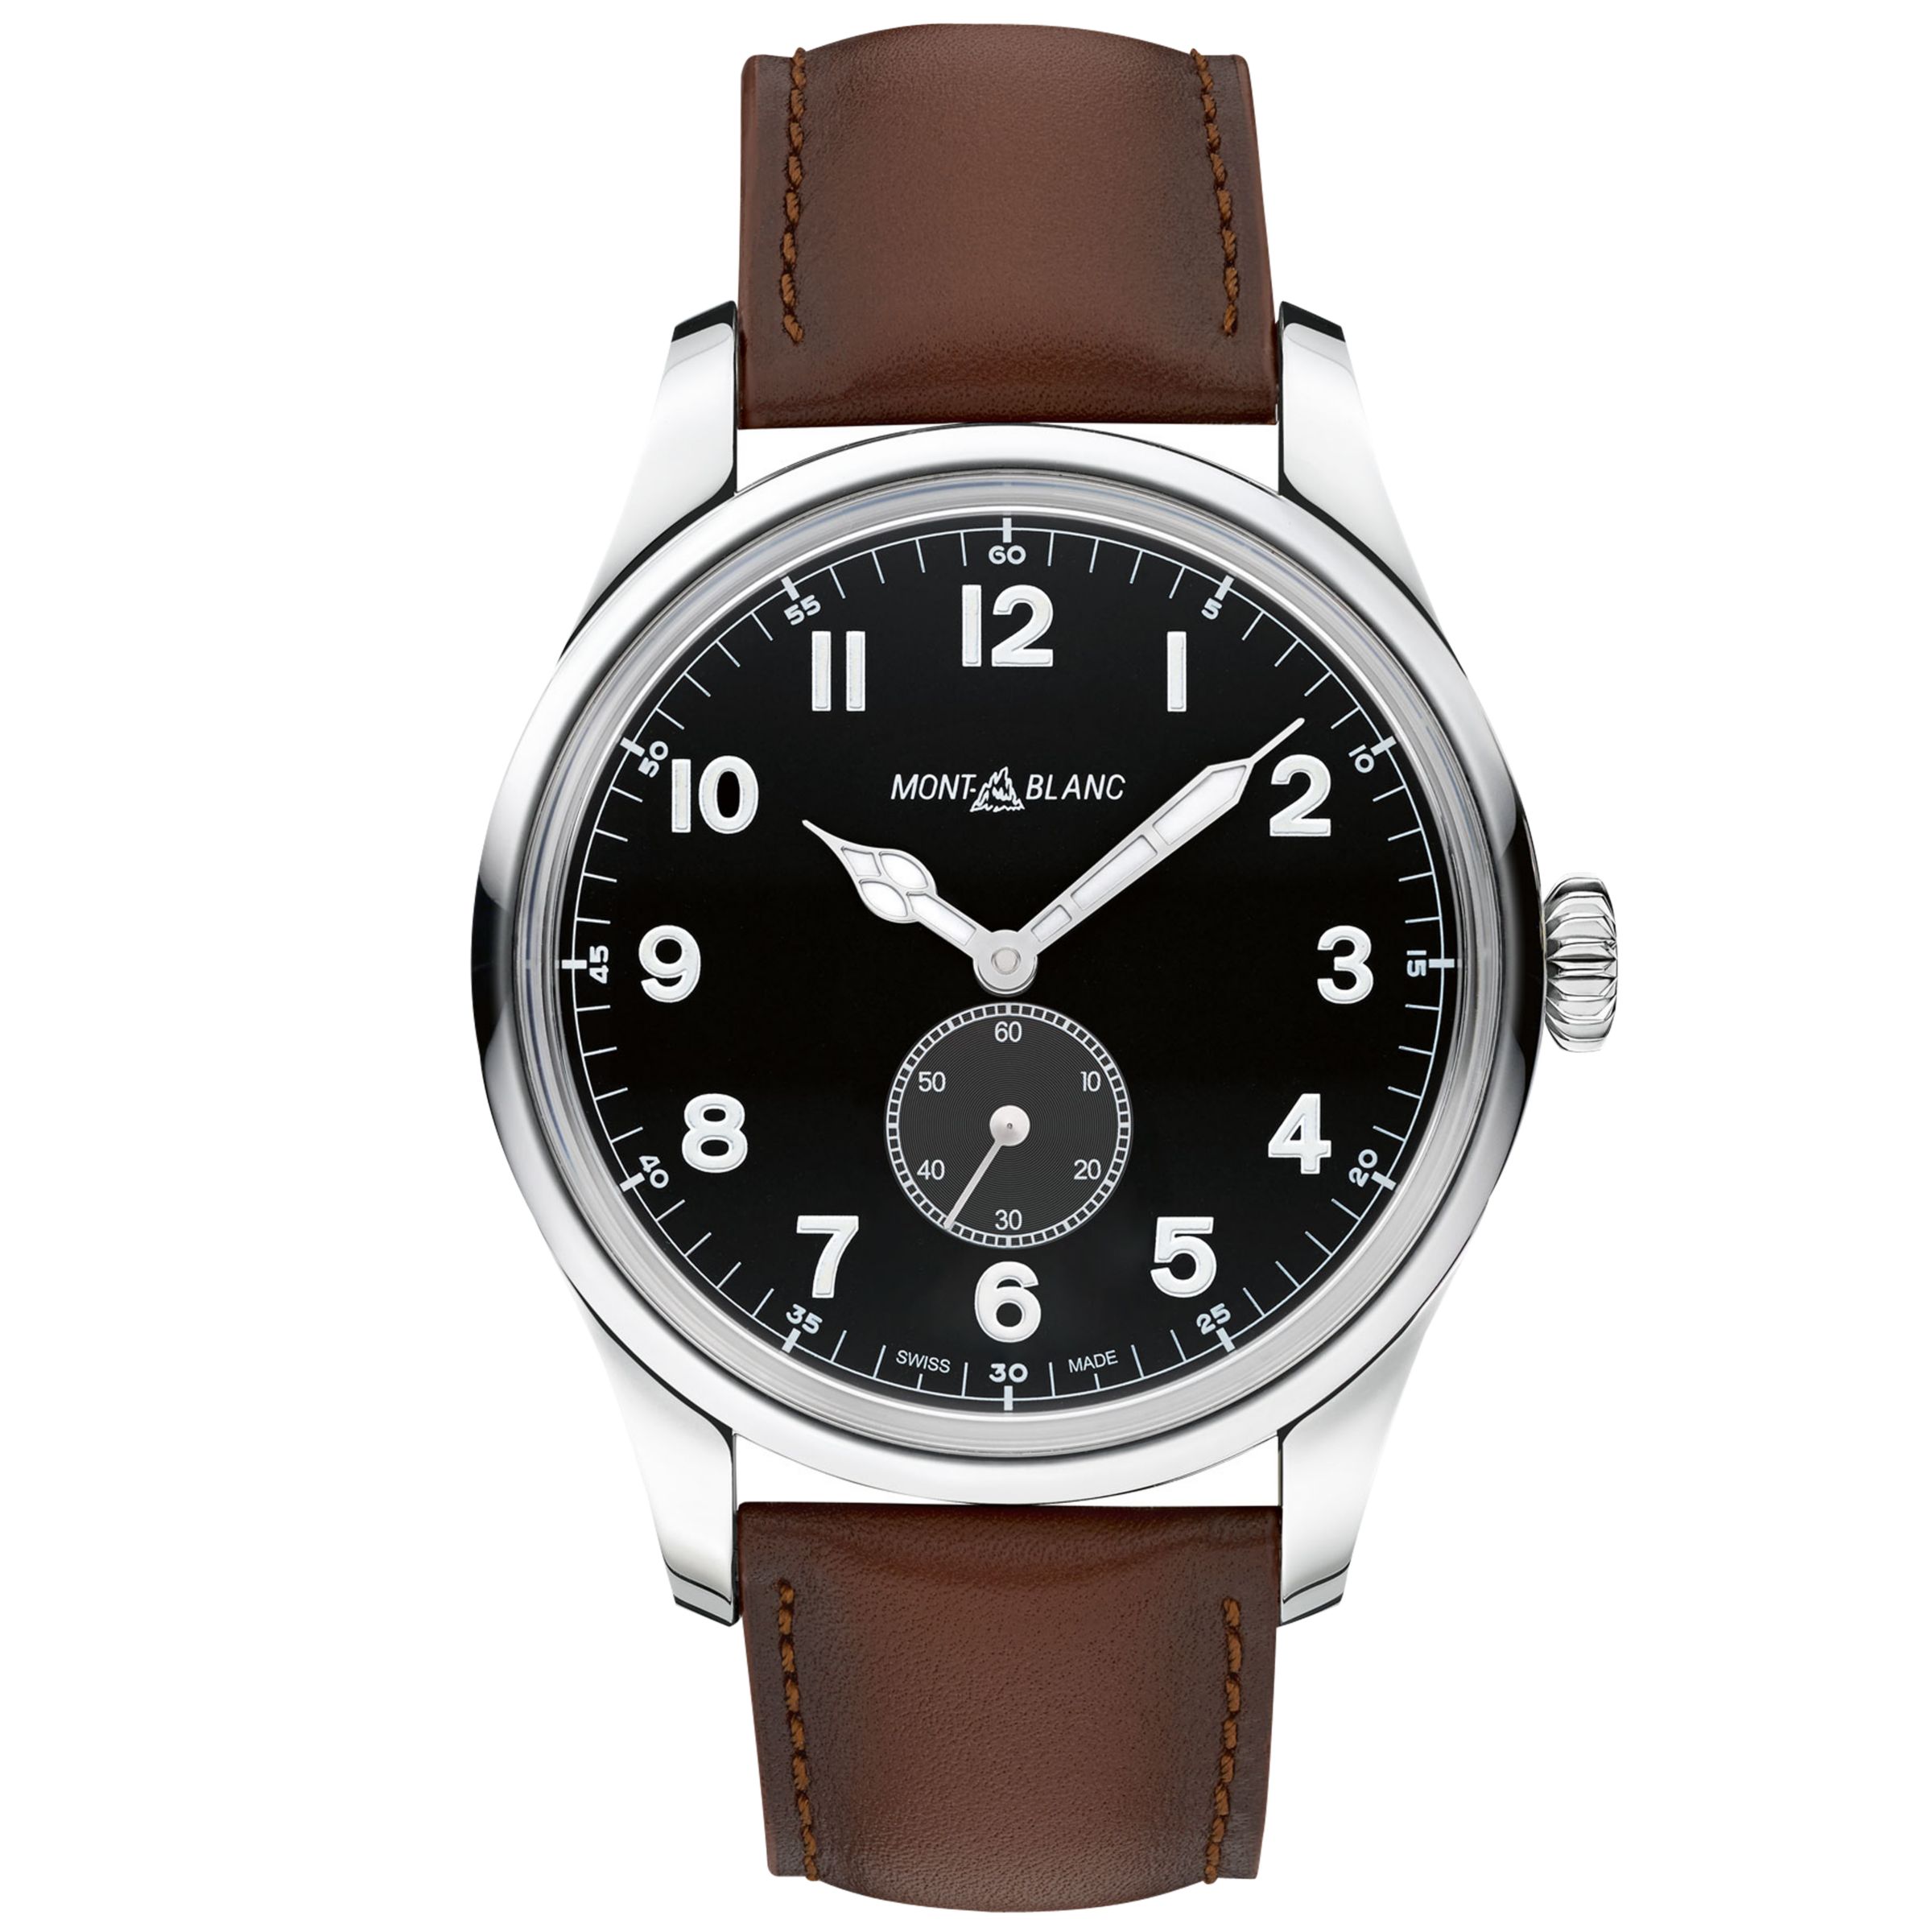 Montblanc 115073 Men's 1858 Automatic Small Second Leather Strap Watch, Brown/Black